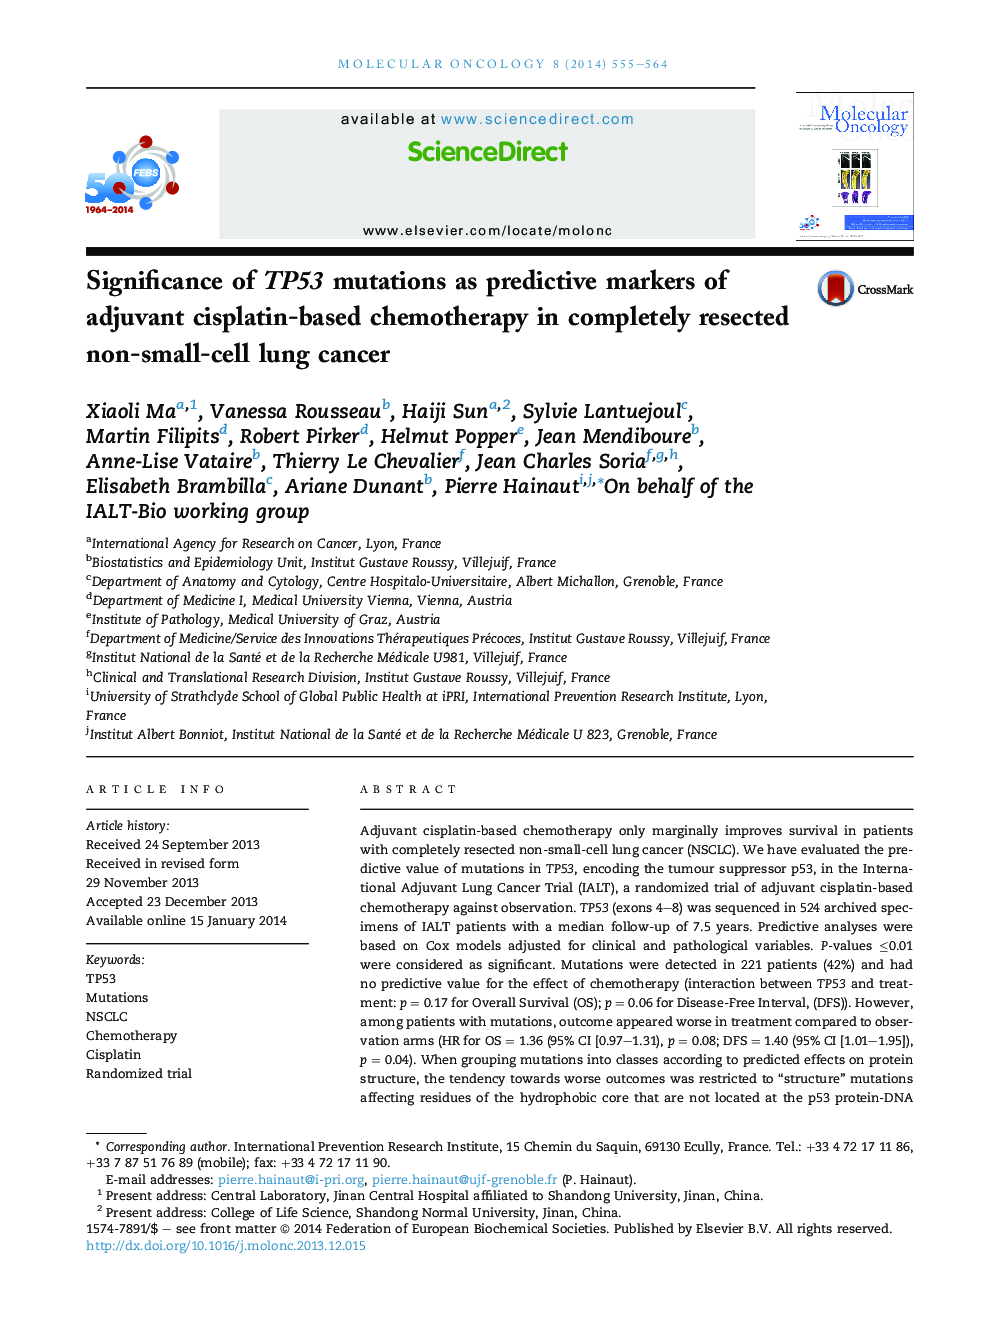 Significance of TP53 mutations as predictive markers of adjuvant cisplatin-based chemotherapy in completely resected non-small-cell lung cancer